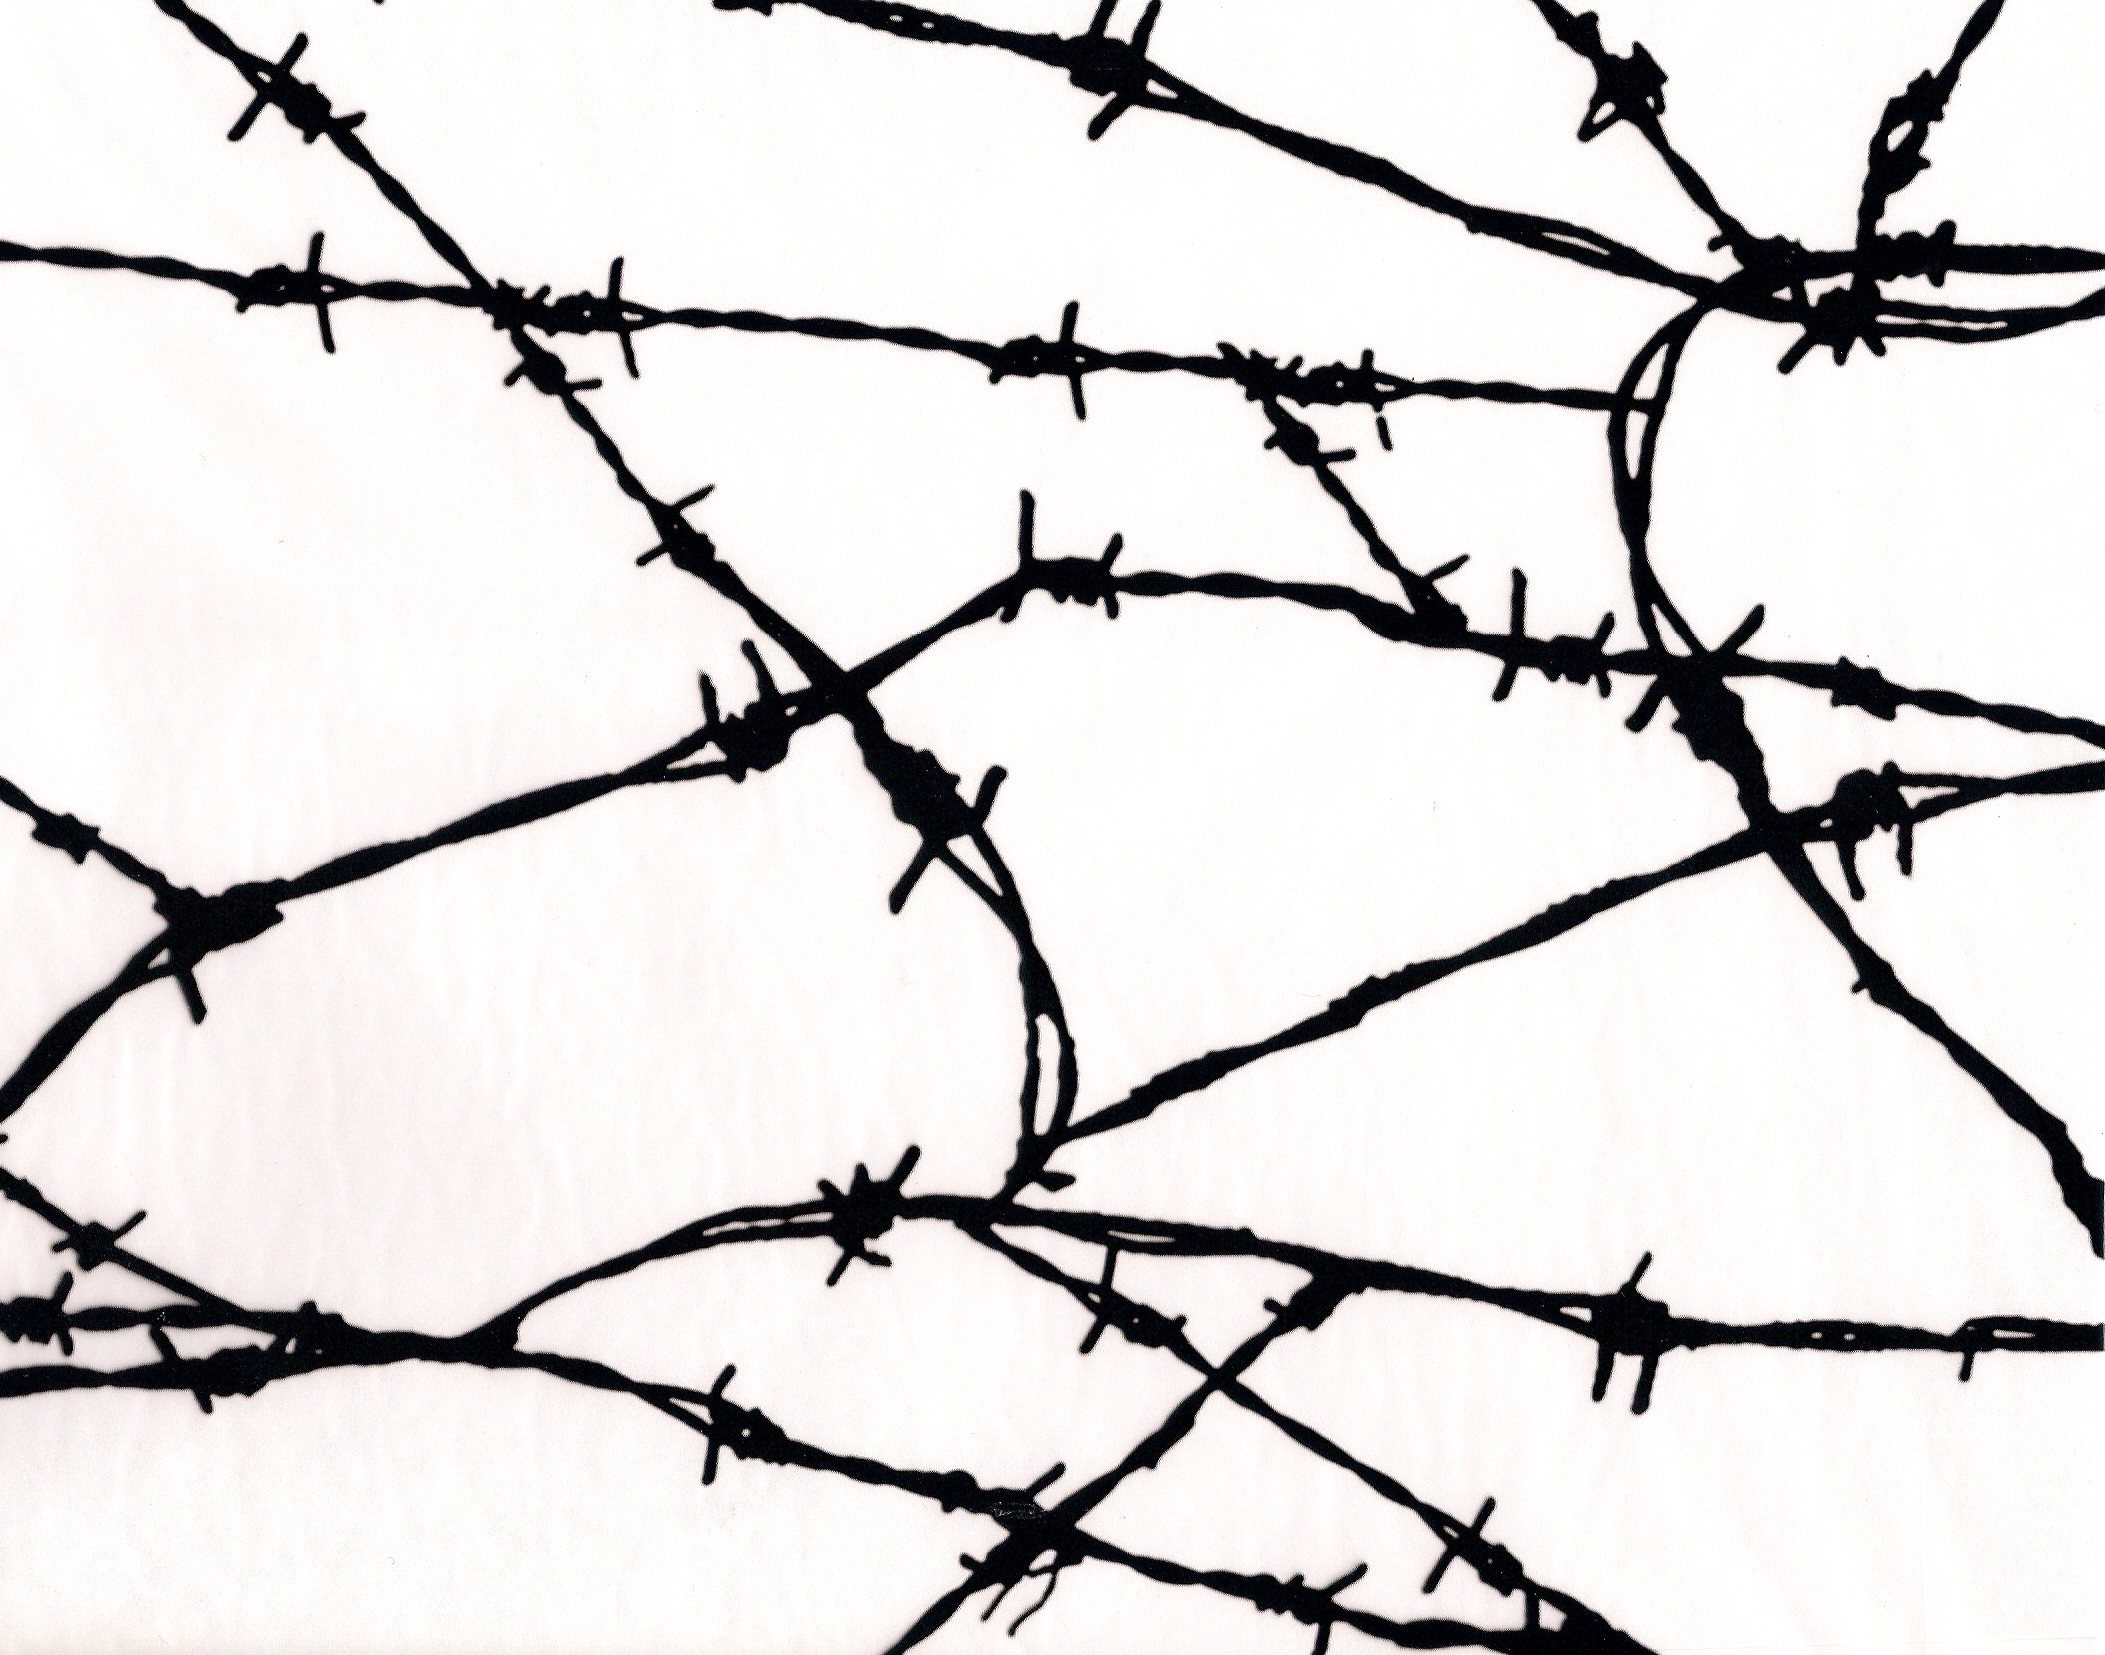 Barbed Wire Image - ClipArt Best